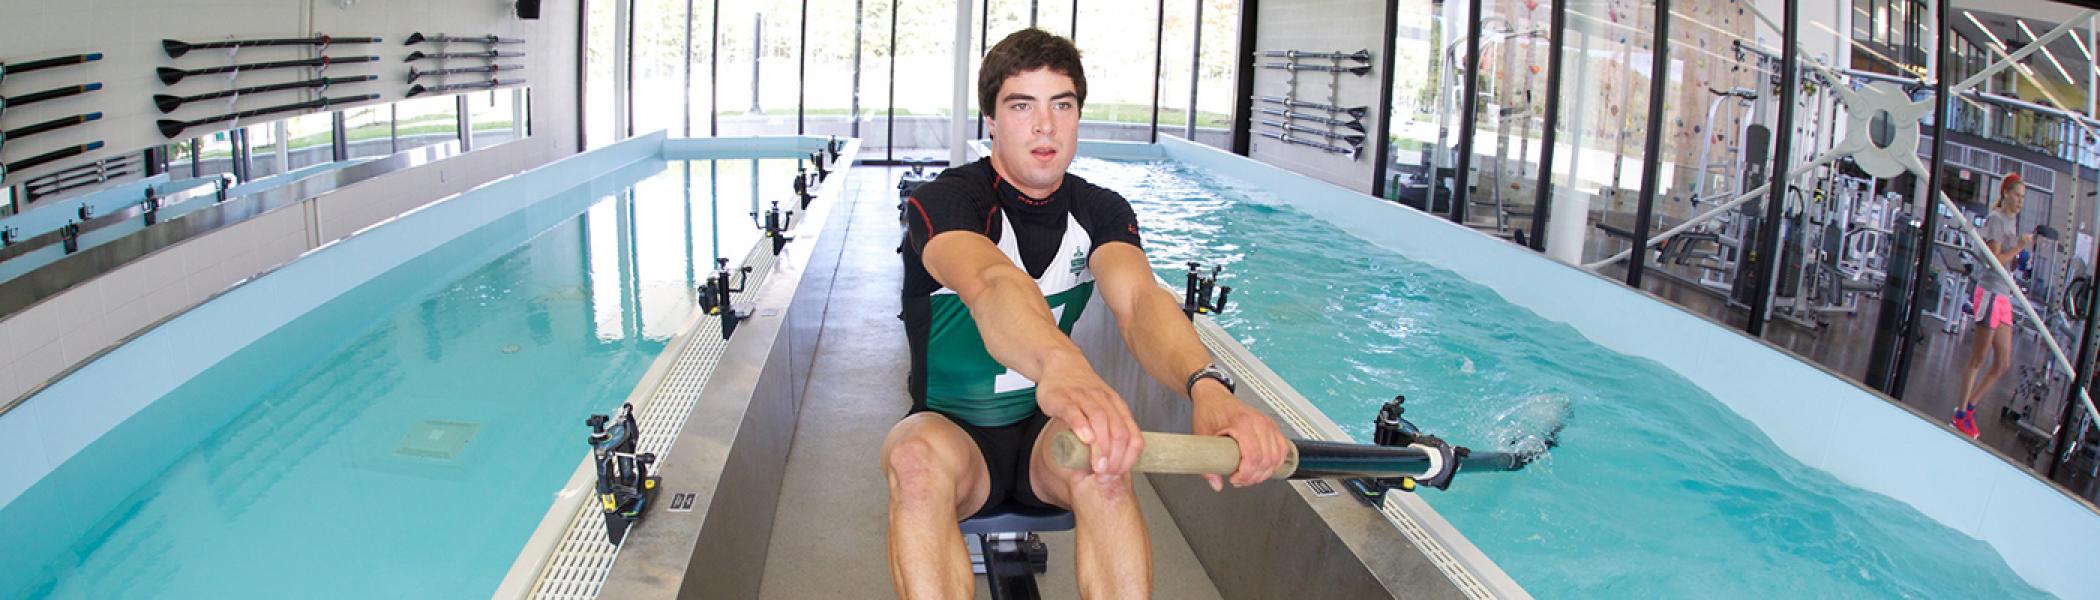 Student in the rowing tank at the Athlethic Centre practicing his strokes